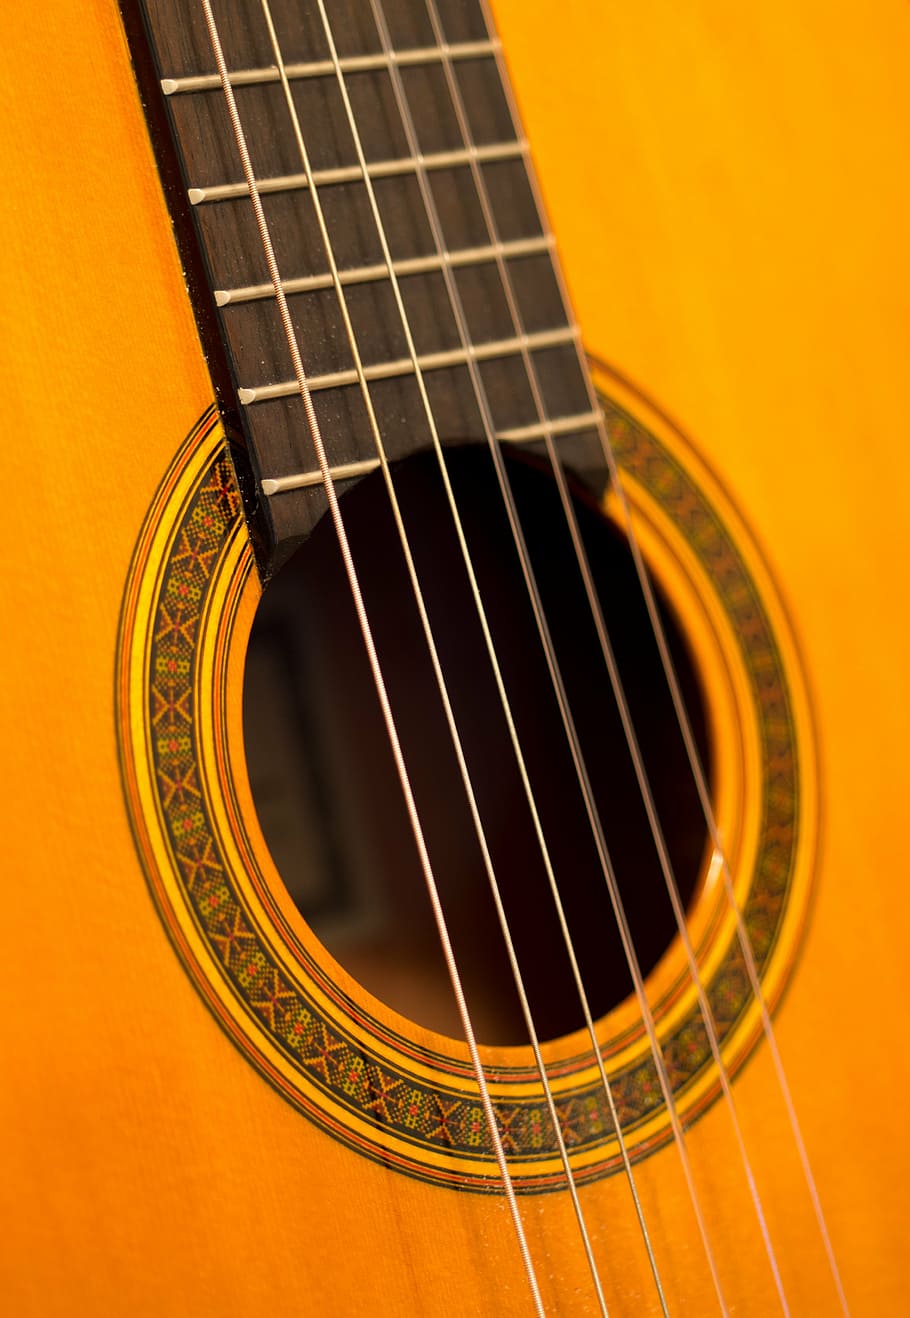 close-up photography, guitar string, guitar, classical guitar, music, instrument, musical, acoustic, spanish, strings